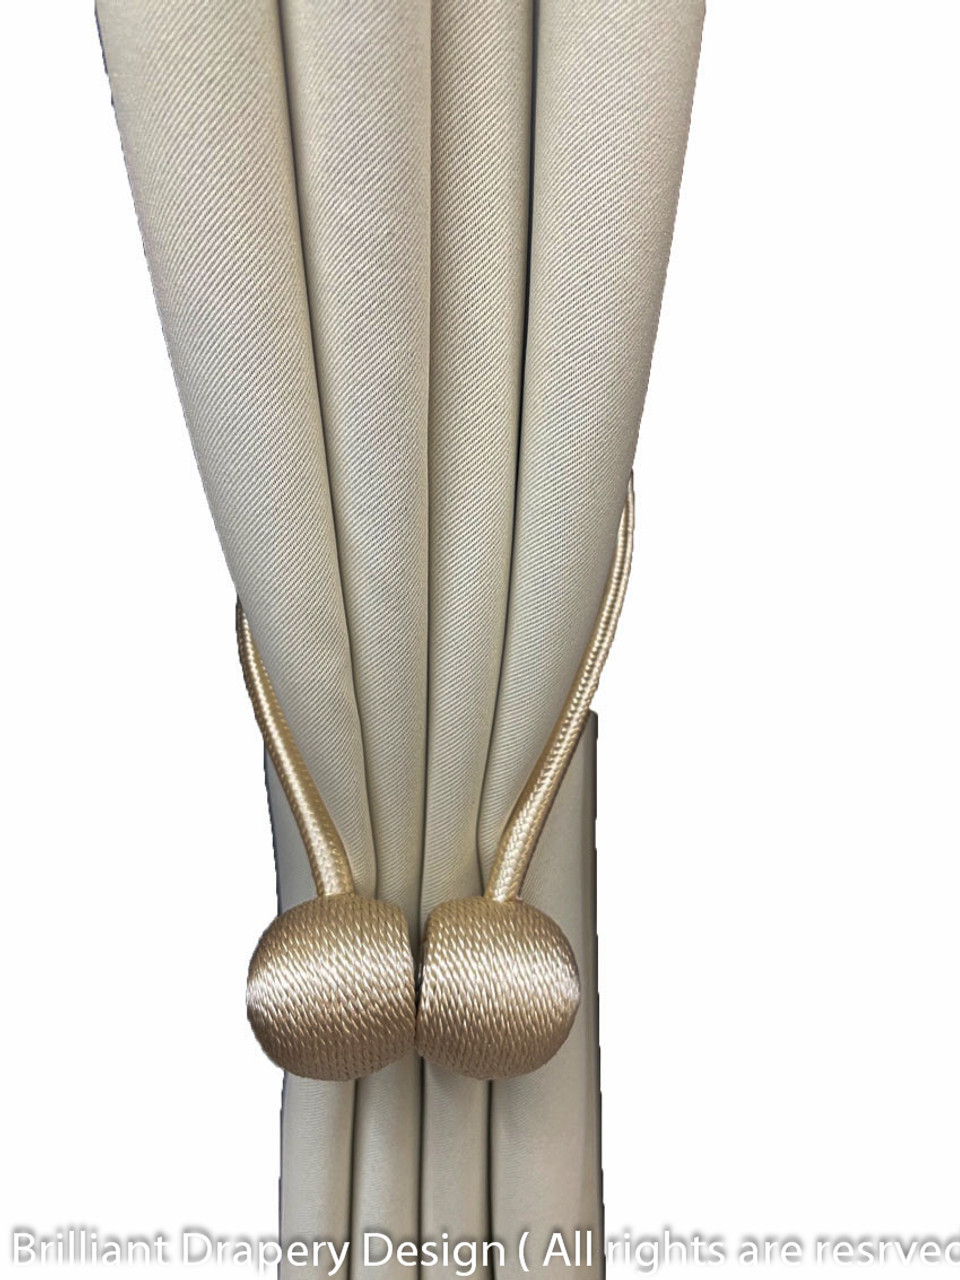 Beyond their practicality, these Beige Magnetic Tassels serve as exquisite embellishments for your window treatments.